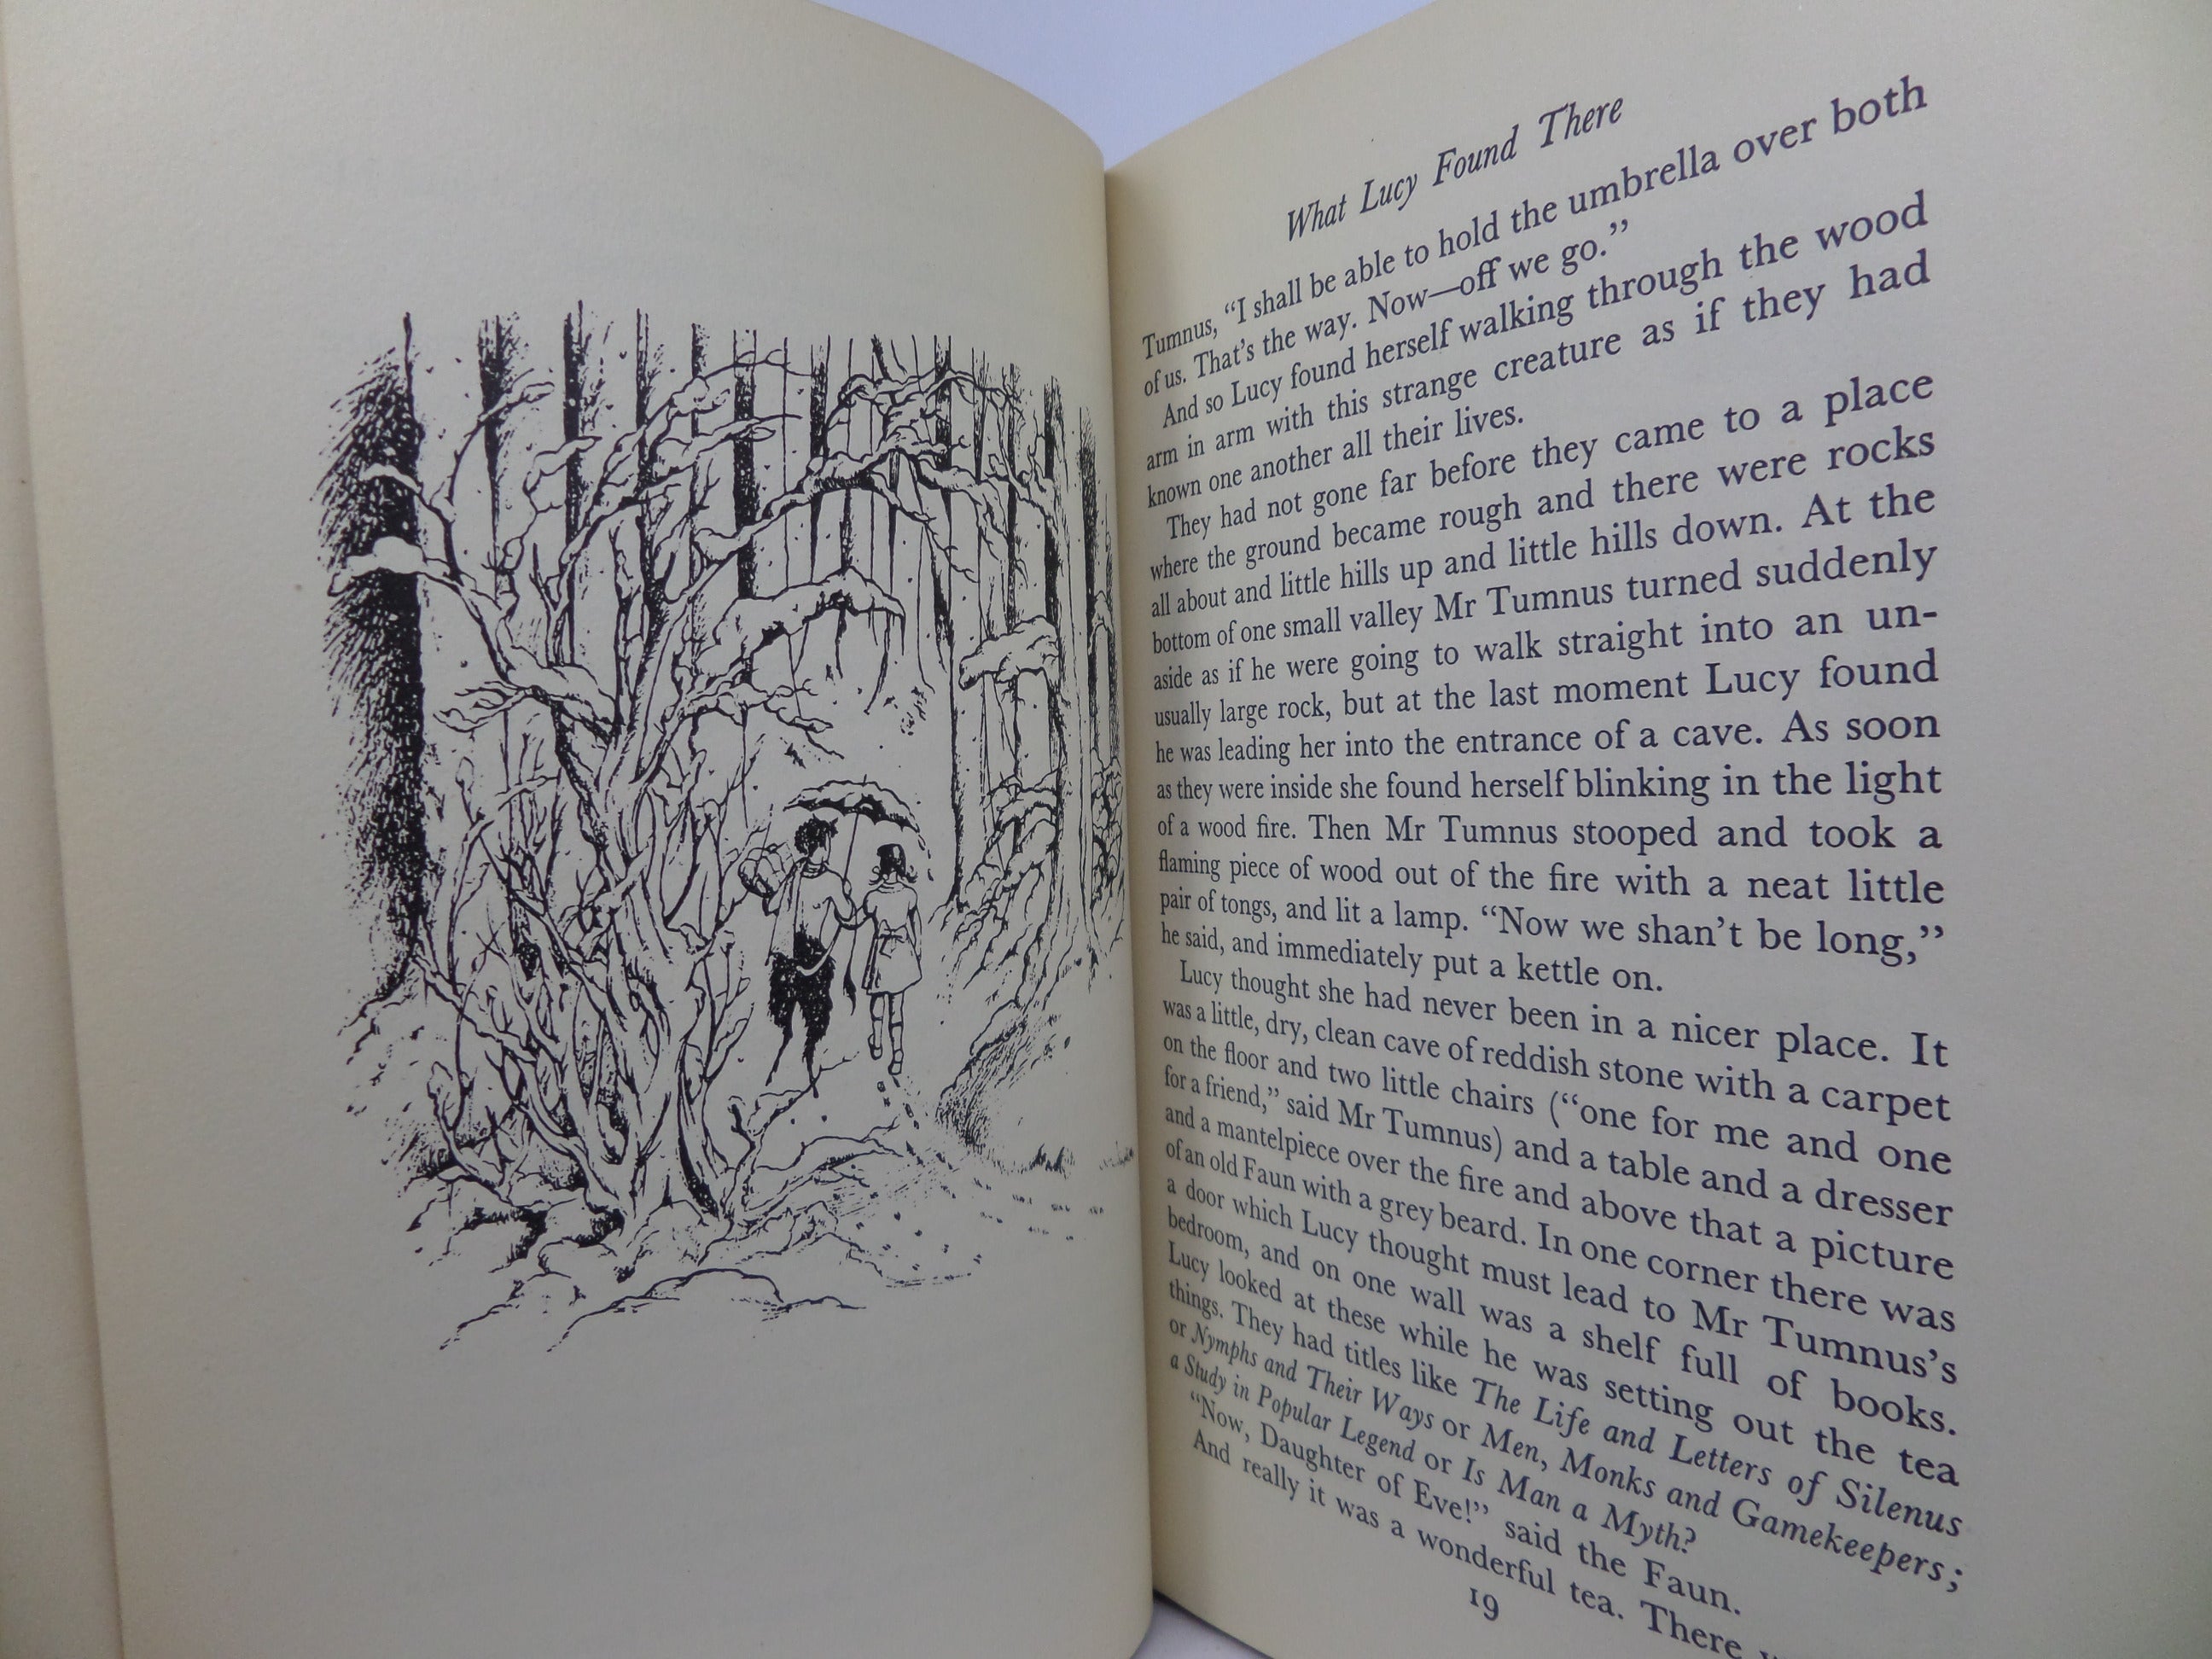 THE LION, THE WITCH AND THE WARDROBE BY C. S. LEWIS 1956 THIRD IMPRESSION